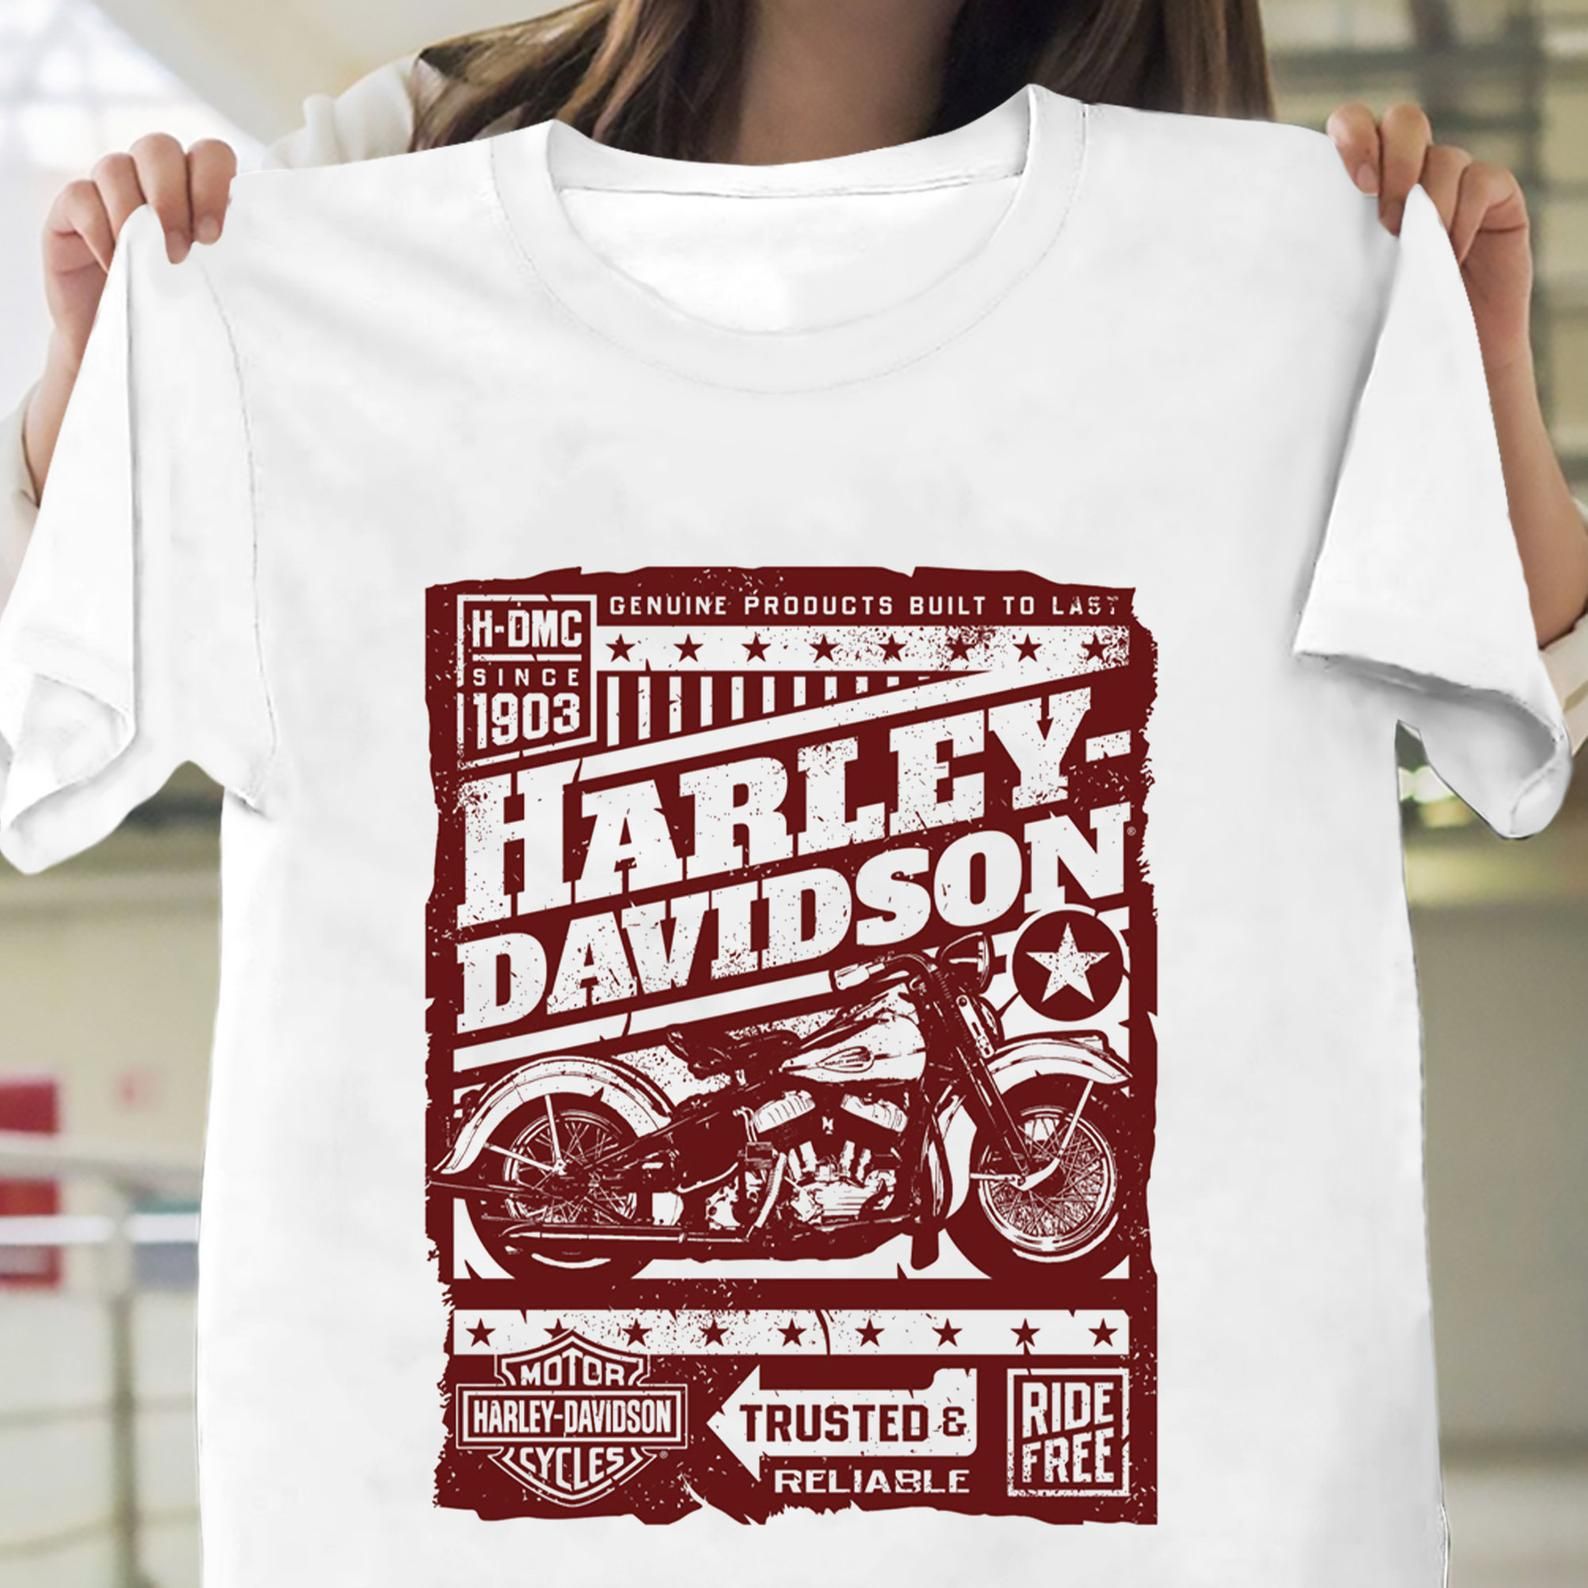 ! Harley Davidson Genuine Products Built To Last T-shirt Unisex S-5 ...